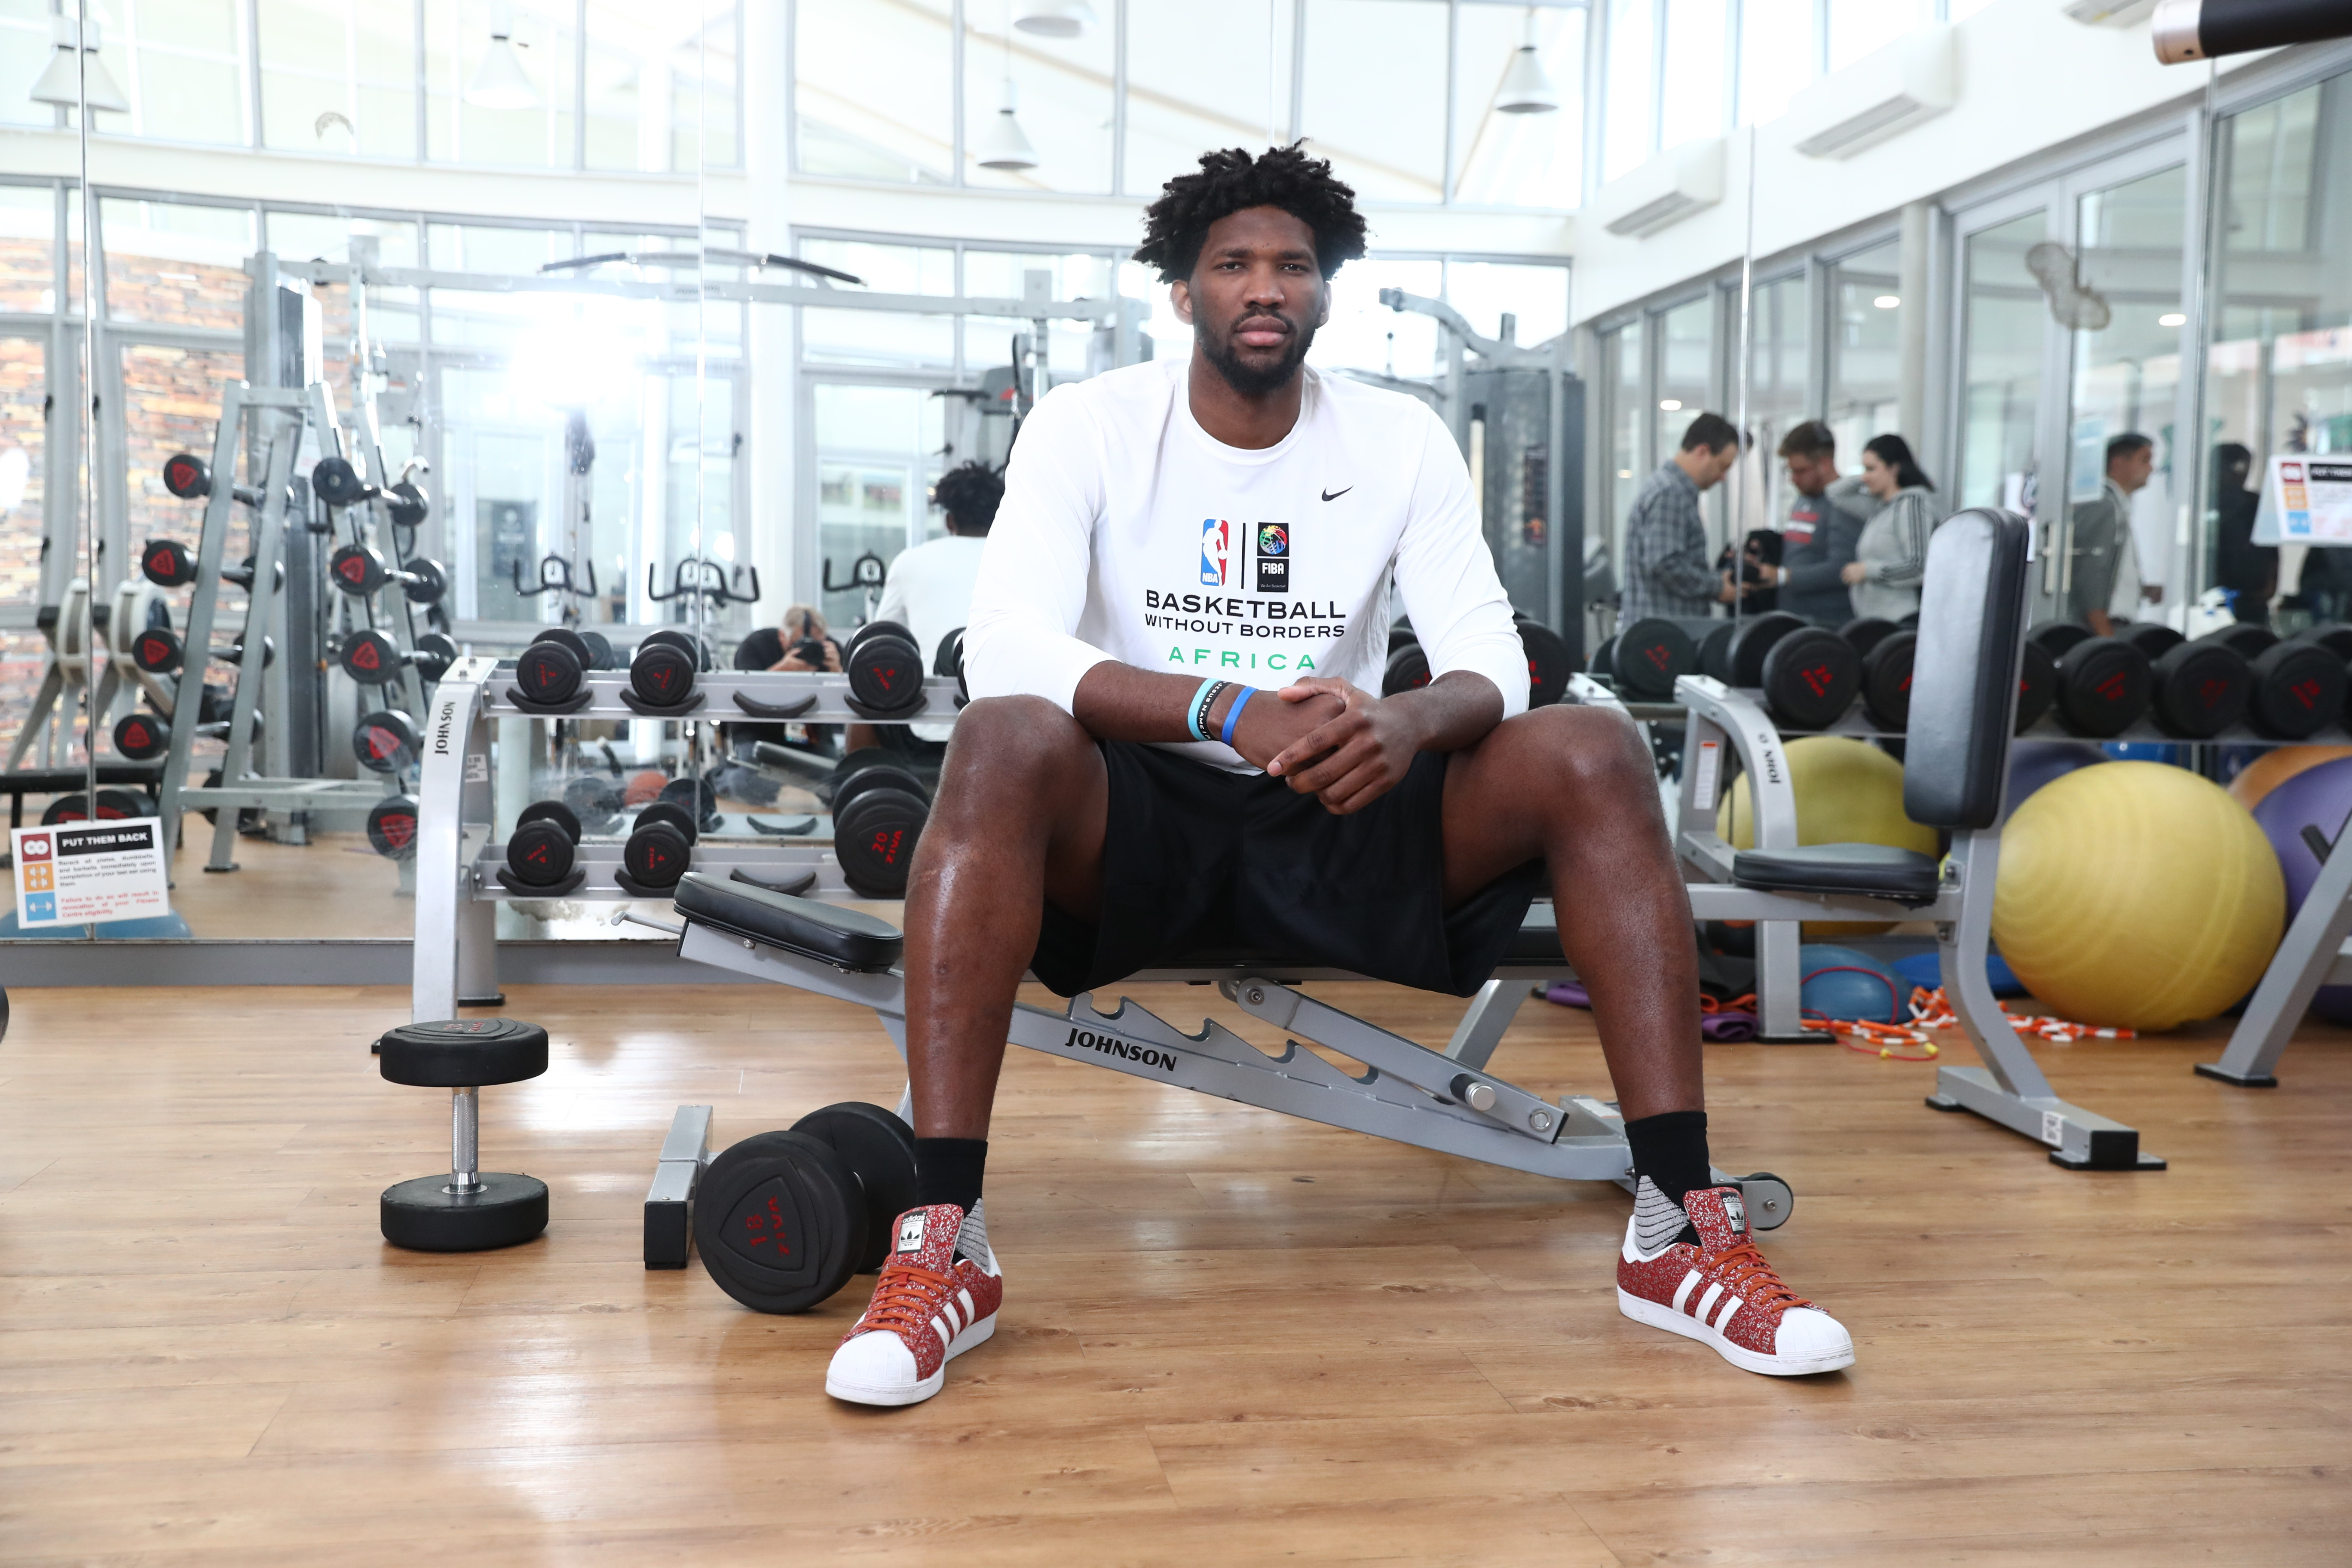 NBA Draft prospect Joel Embiid poses for portraits with the Draft News  Photo - Getty Images